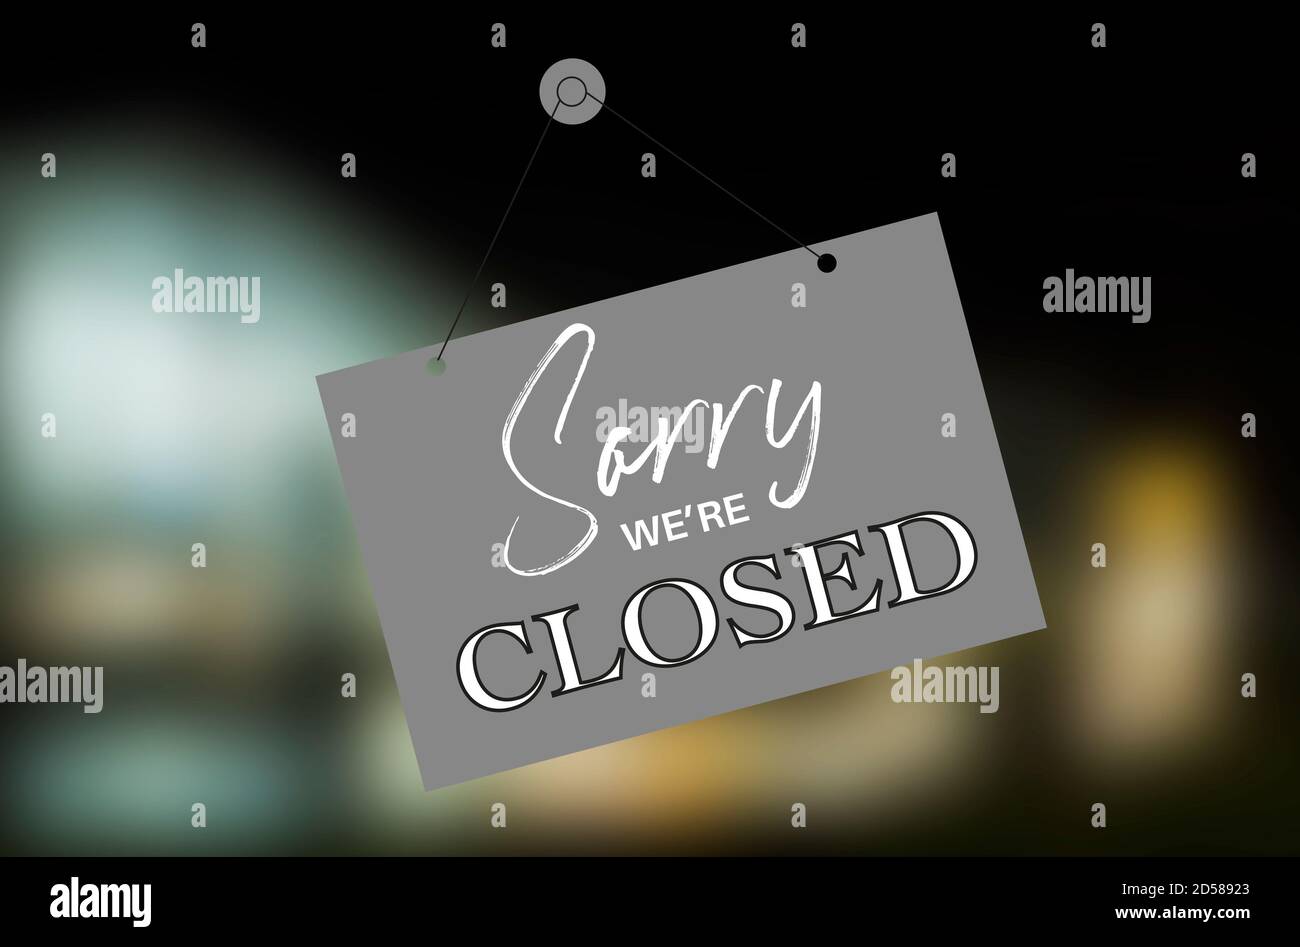 Sorry We’re closed sign on a blured background Stock Photo